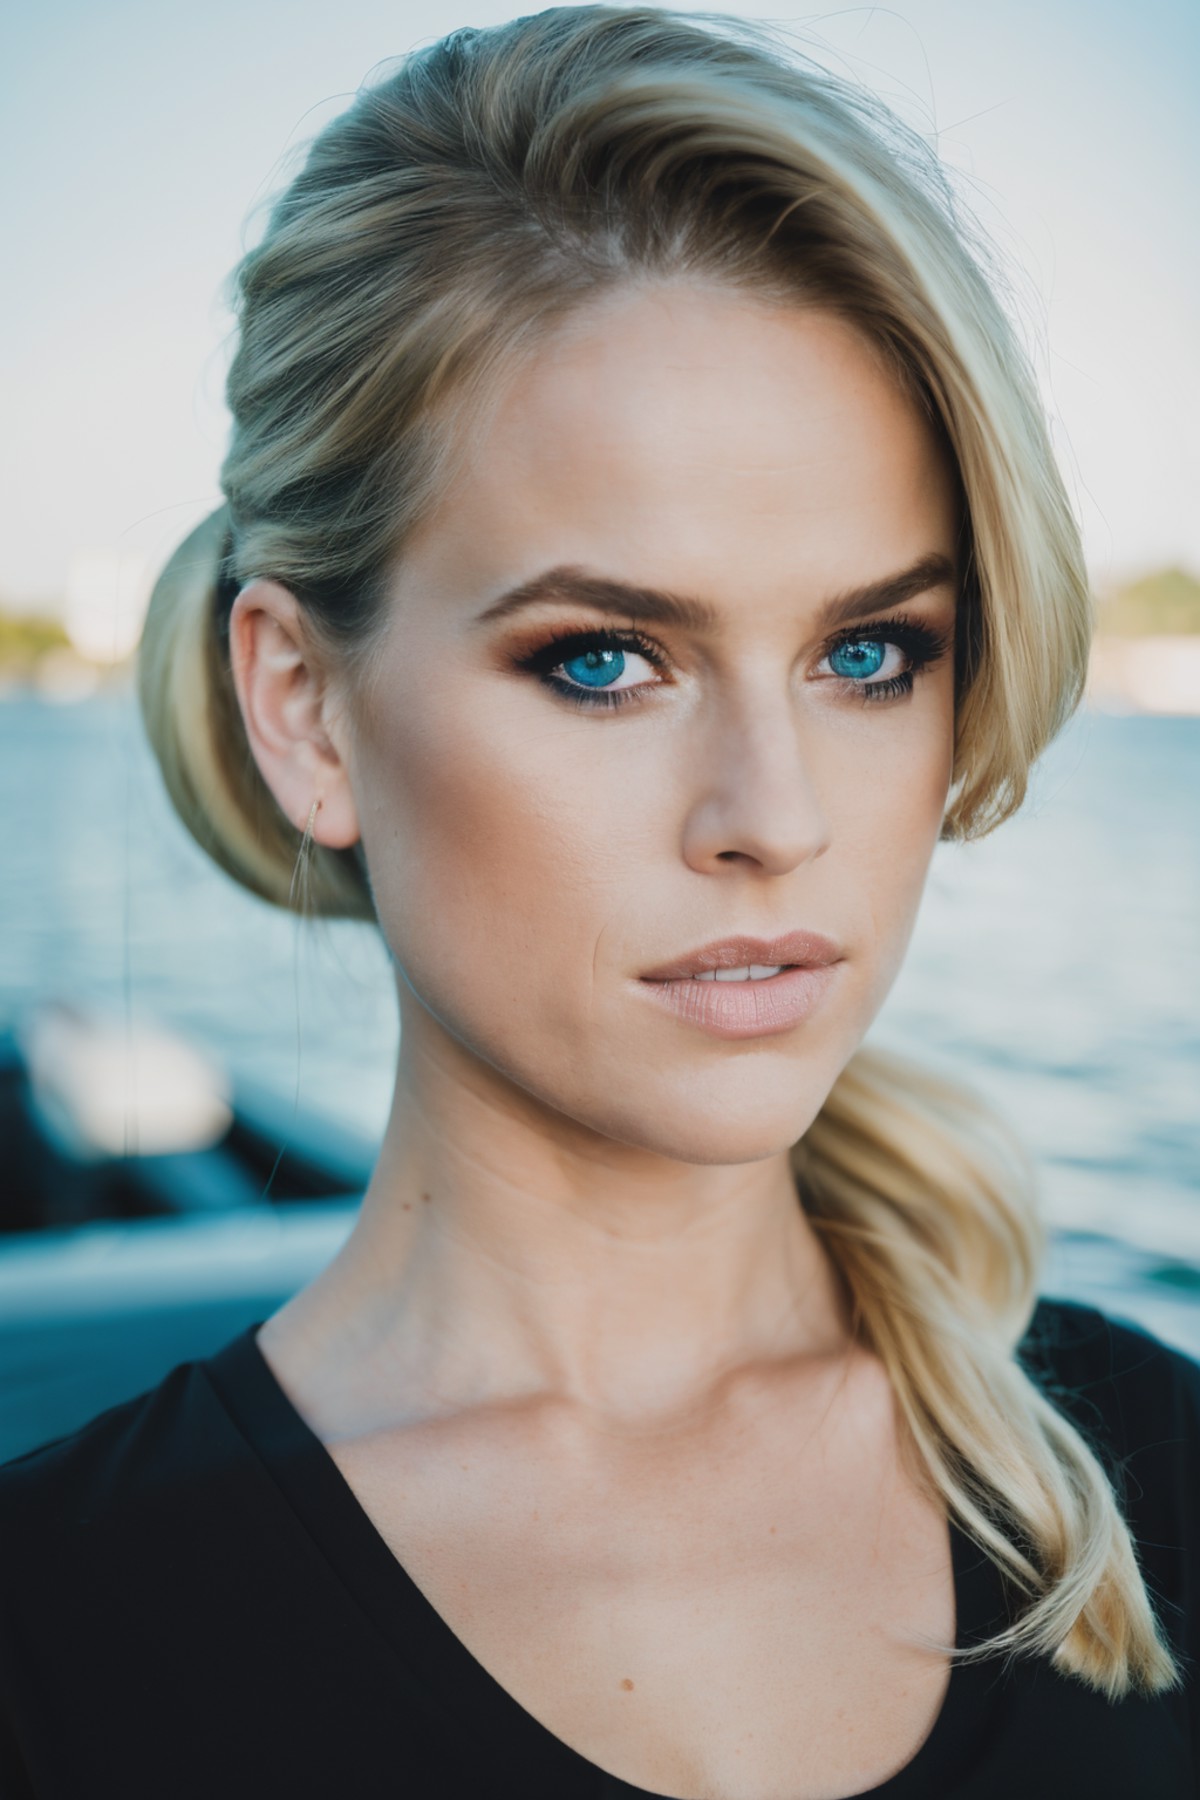 RAW, real photo portrait, aev, on a boat, (wearing  black t-shirt), pretty face, insanely detailed eyes, light blonde hair...